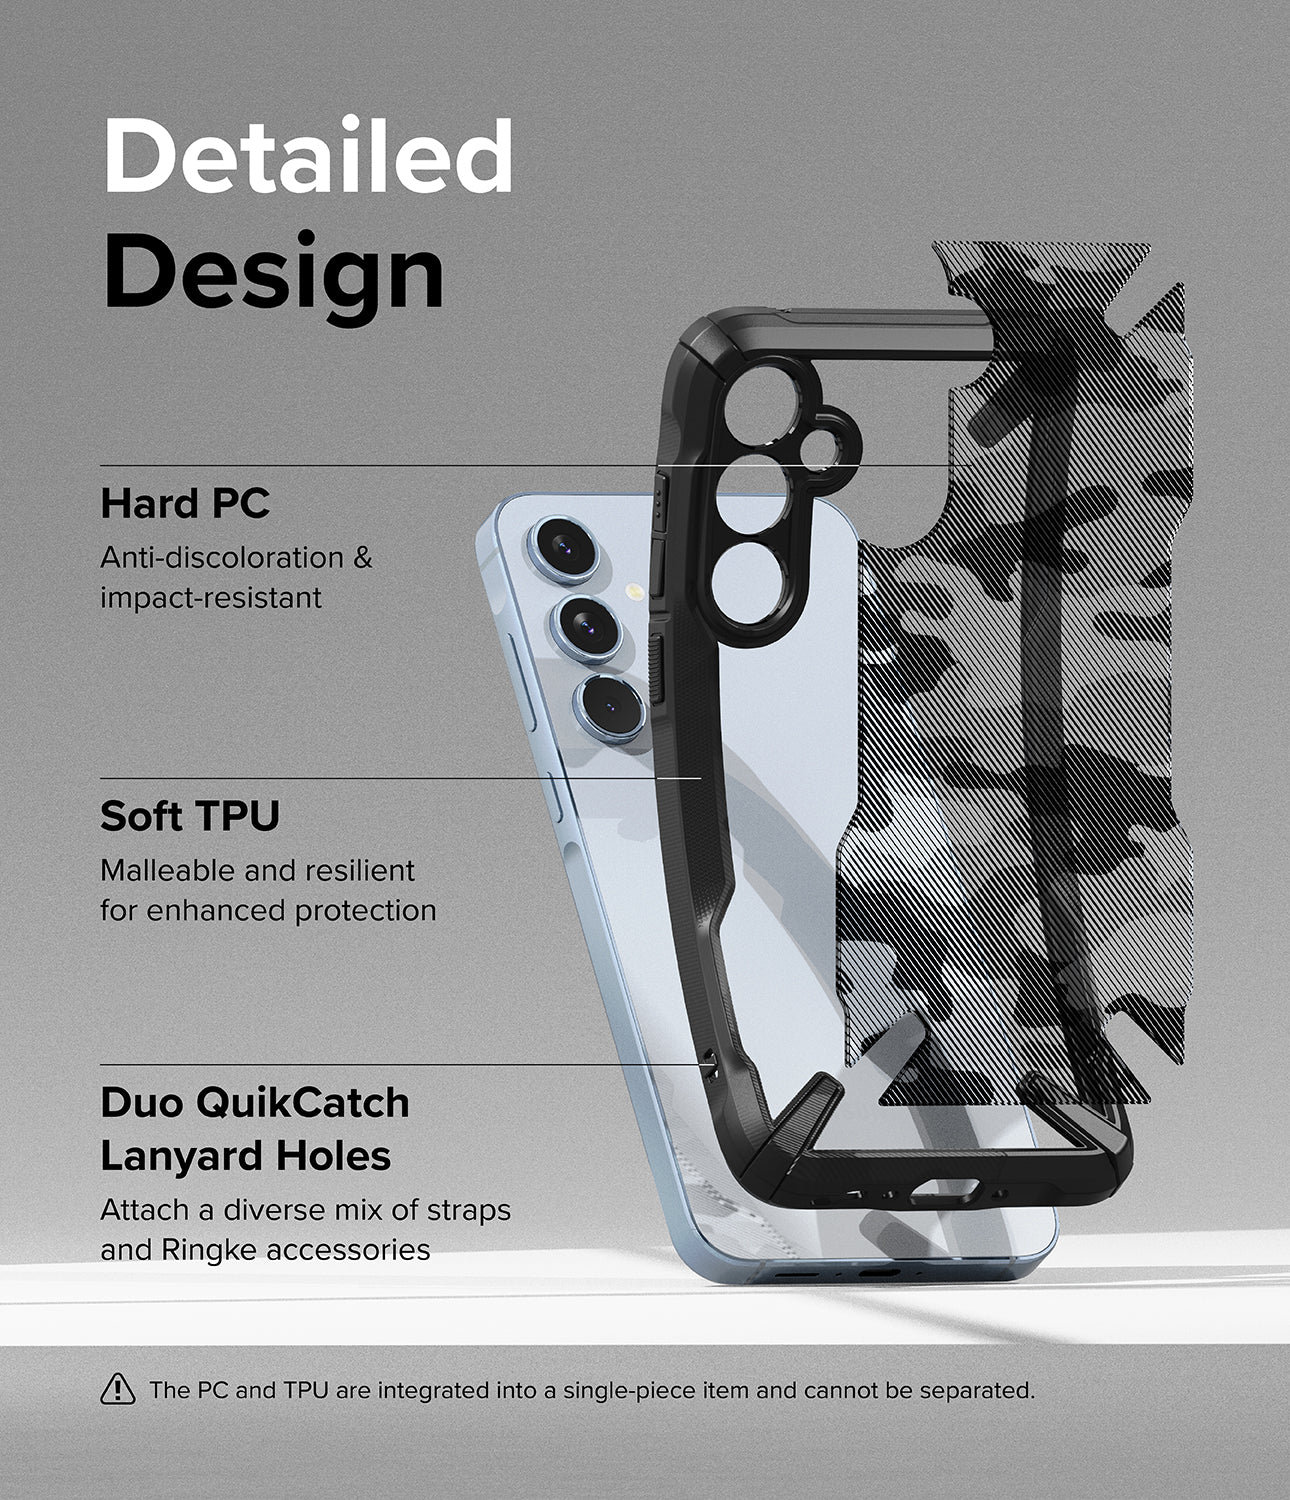 Galaxy A35 Case | Fusion-X - Detailed Design. Anti-discoloration and impact-resistant with Hard PC. Malleable and resilient for enhanced protection with Soft TPU. Duo QuikCatch Lanyard Holes to attach a diverse mix of straps and Ringke accessories.